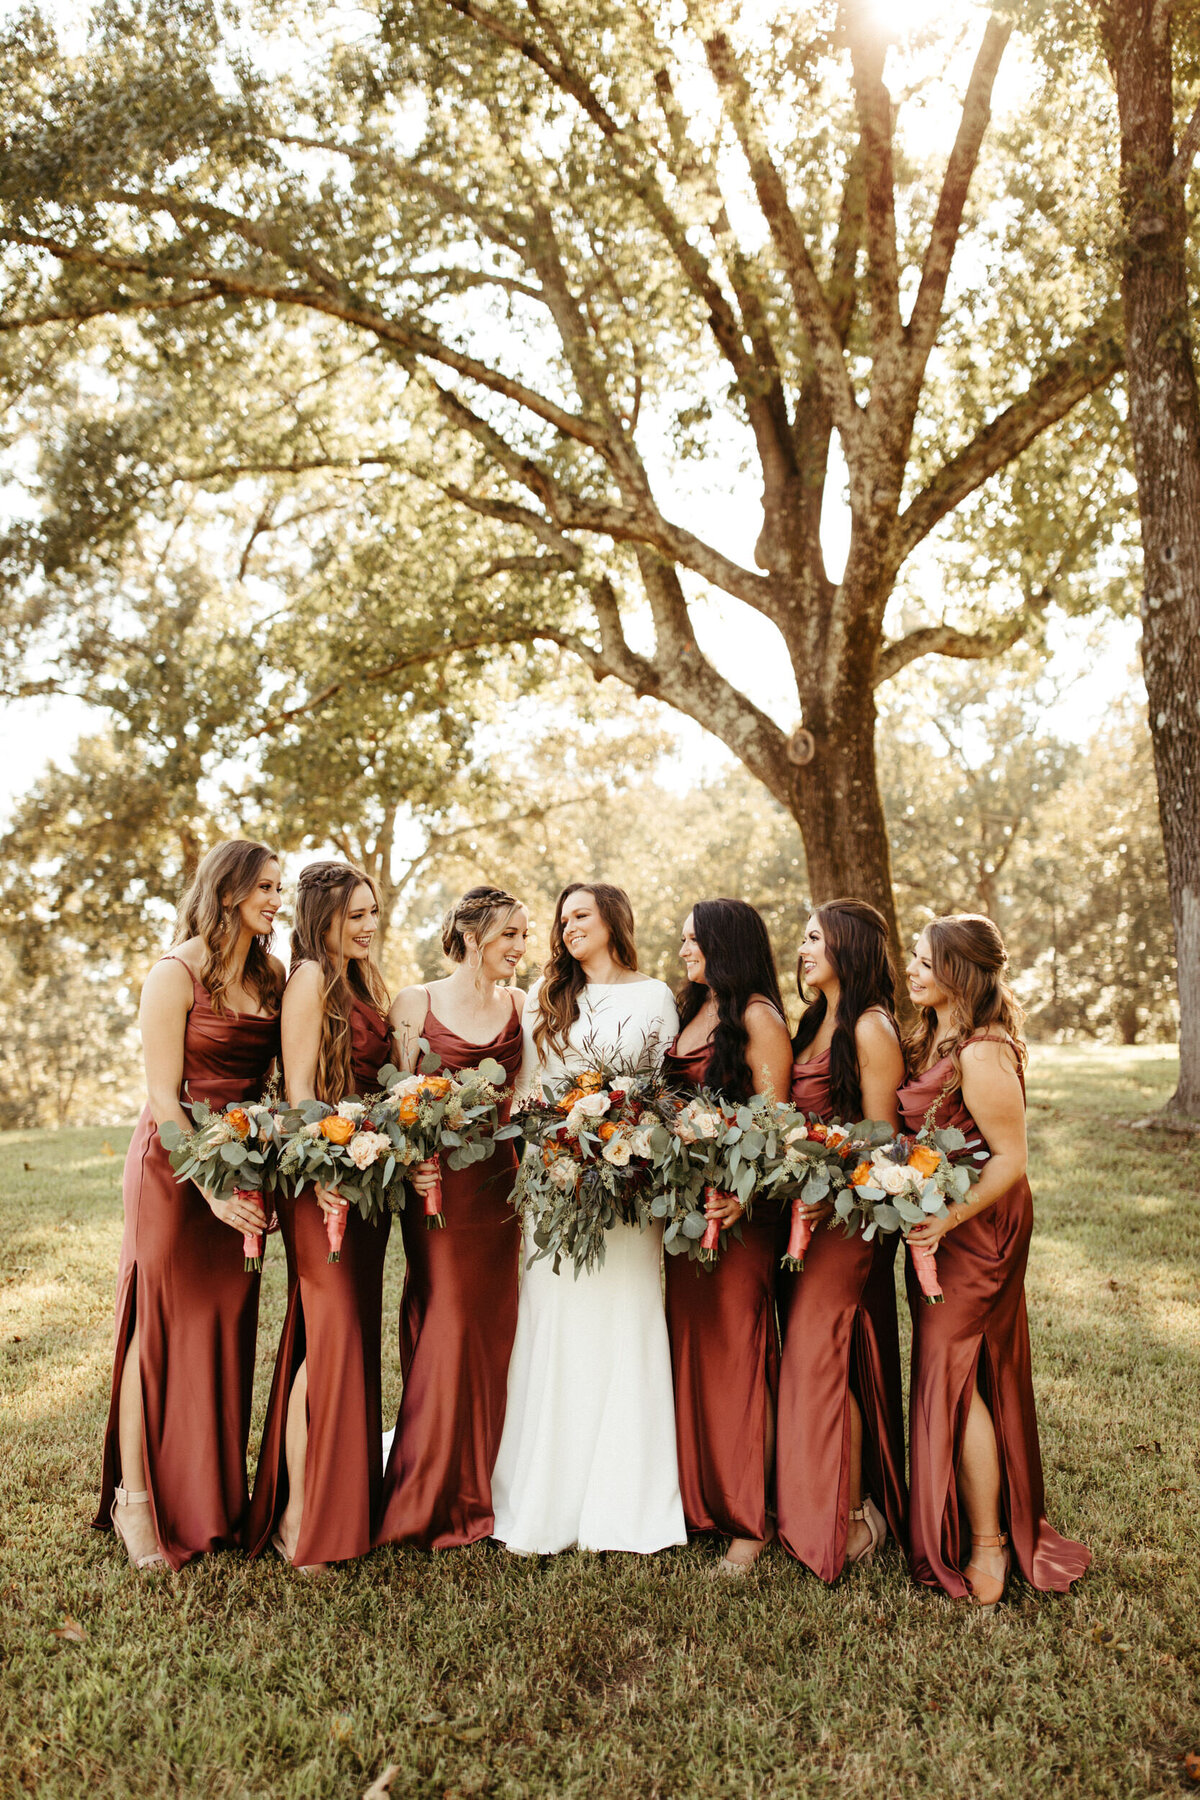 Bride with her six bridesmaids in silk sheath dresses all holding large floral bouquets with greenery and standing under a tree